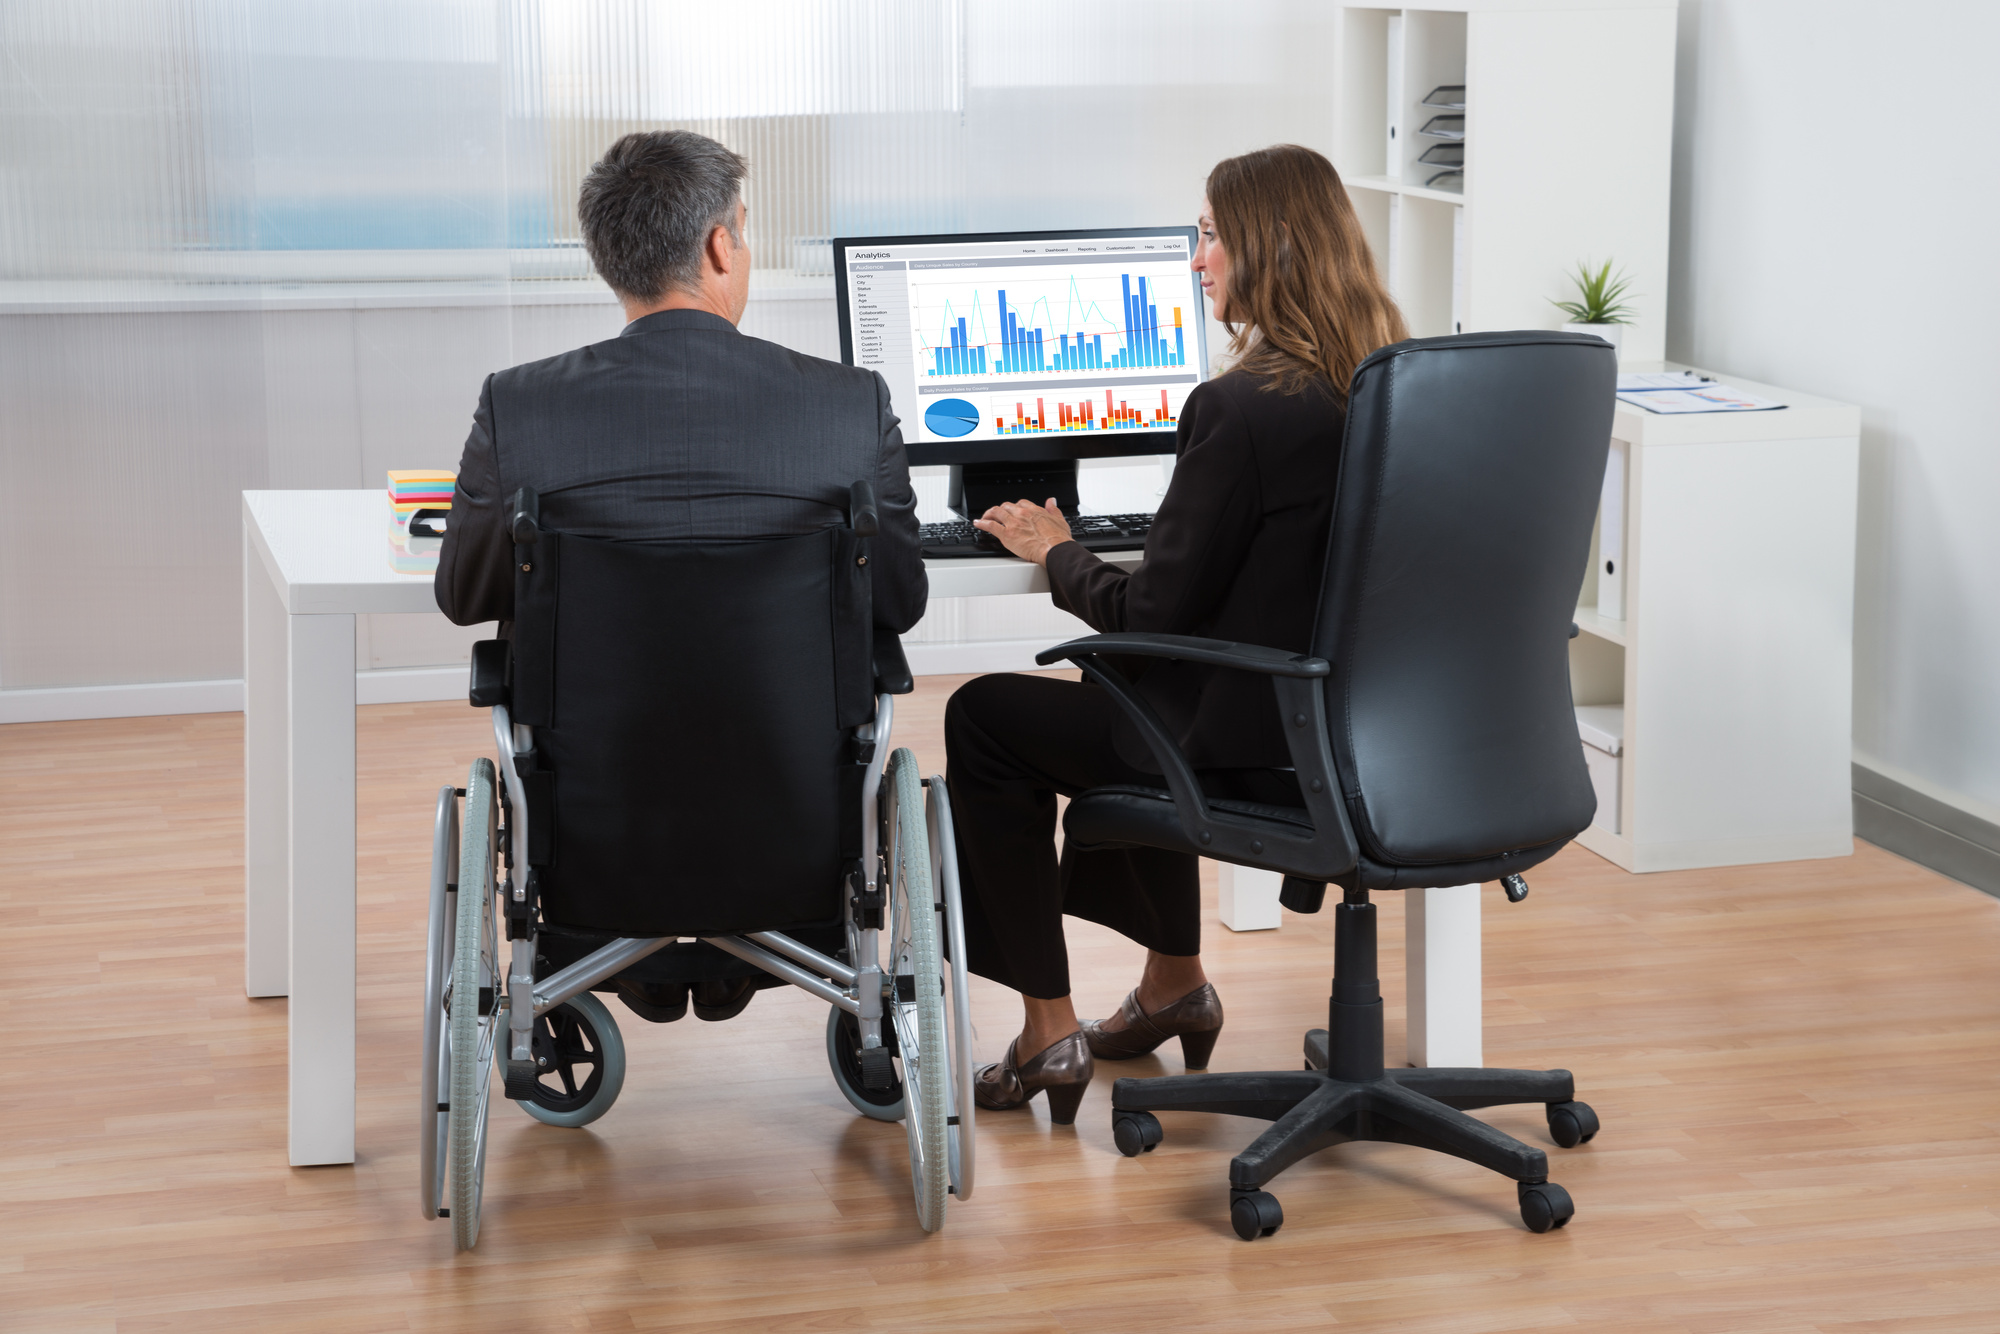 disability discrimination in the workplace